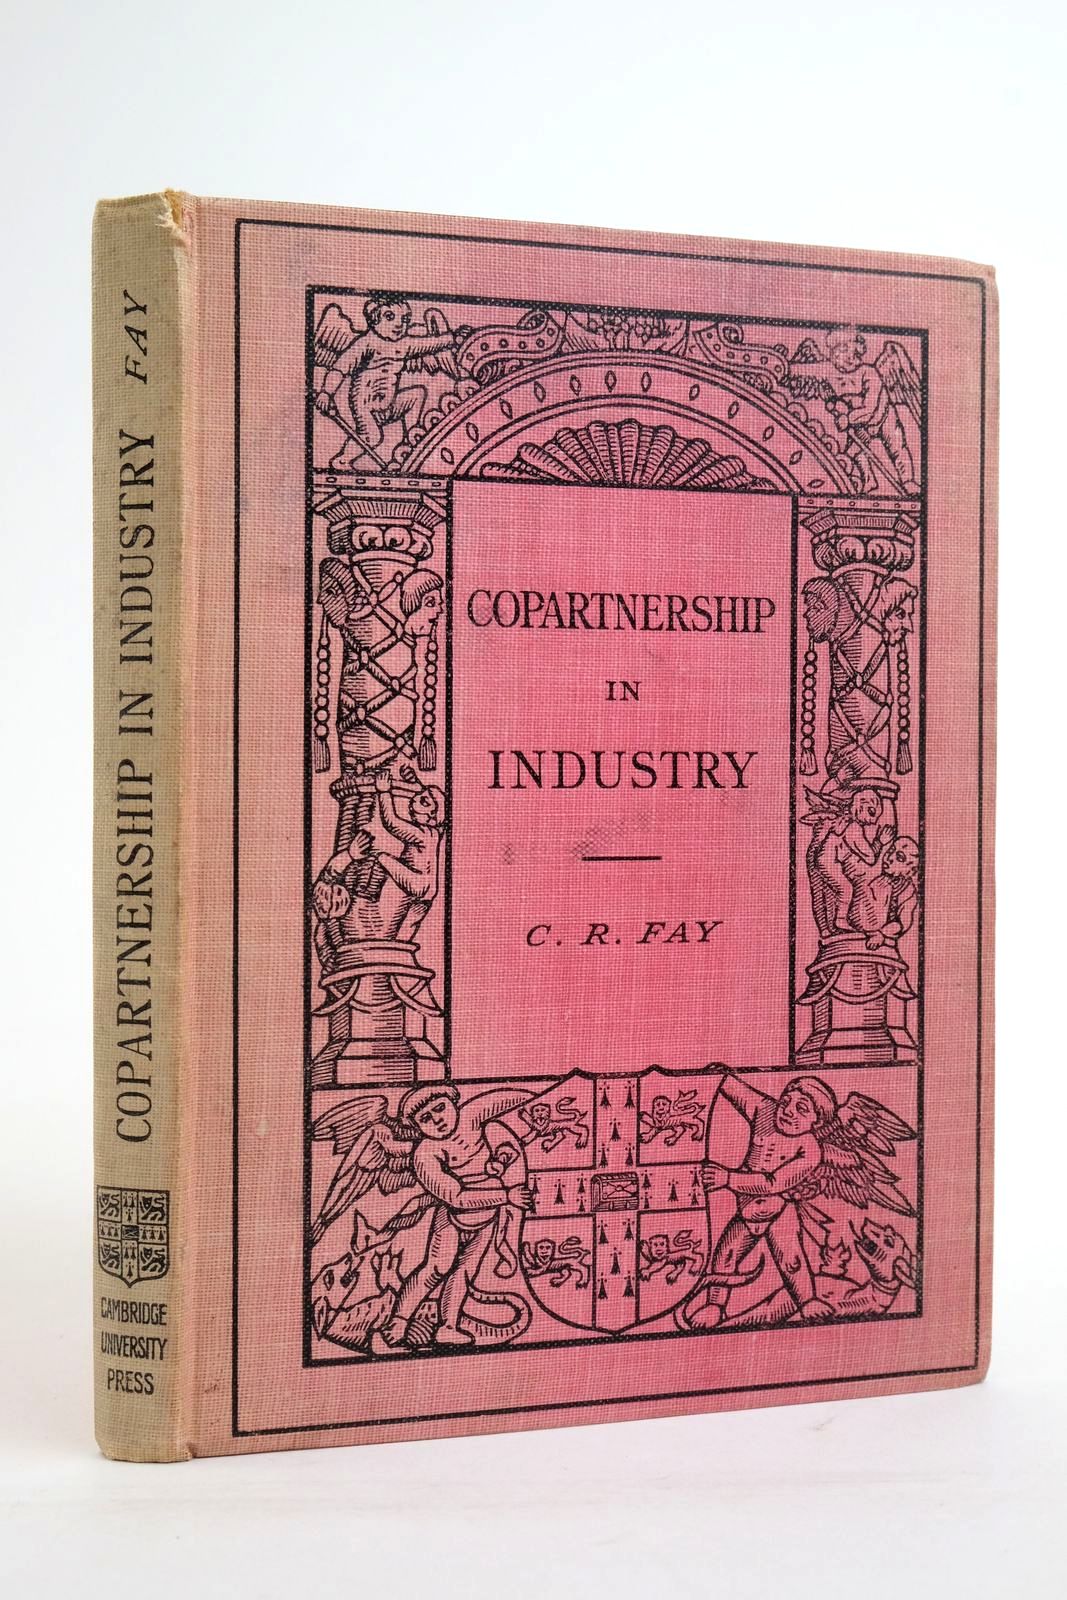 Photo of COPARTNERSHIP IN INDUSTRY written by Fay, C.R. published by Cambridge University Press (STOCK CODE: 2136306)  for sale by Stella & Rose's Books